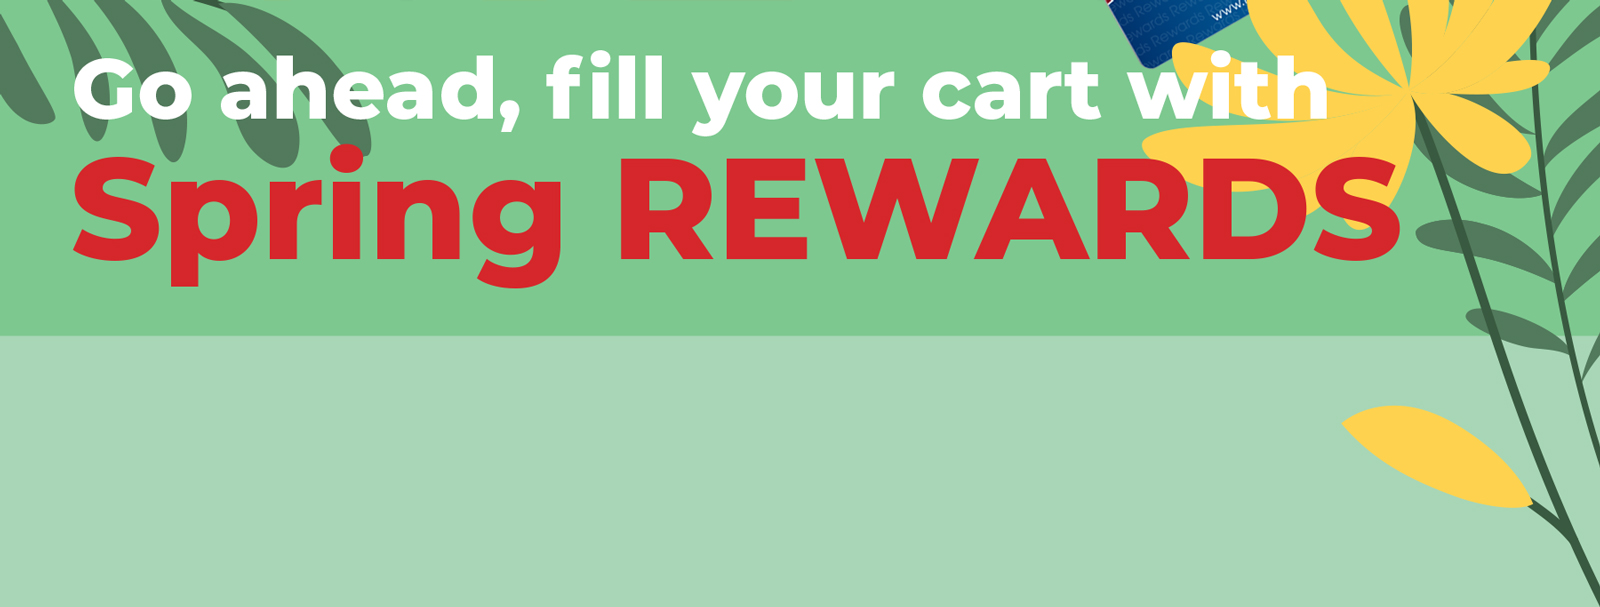 Goahead, Fill your cart with Spring Rewards